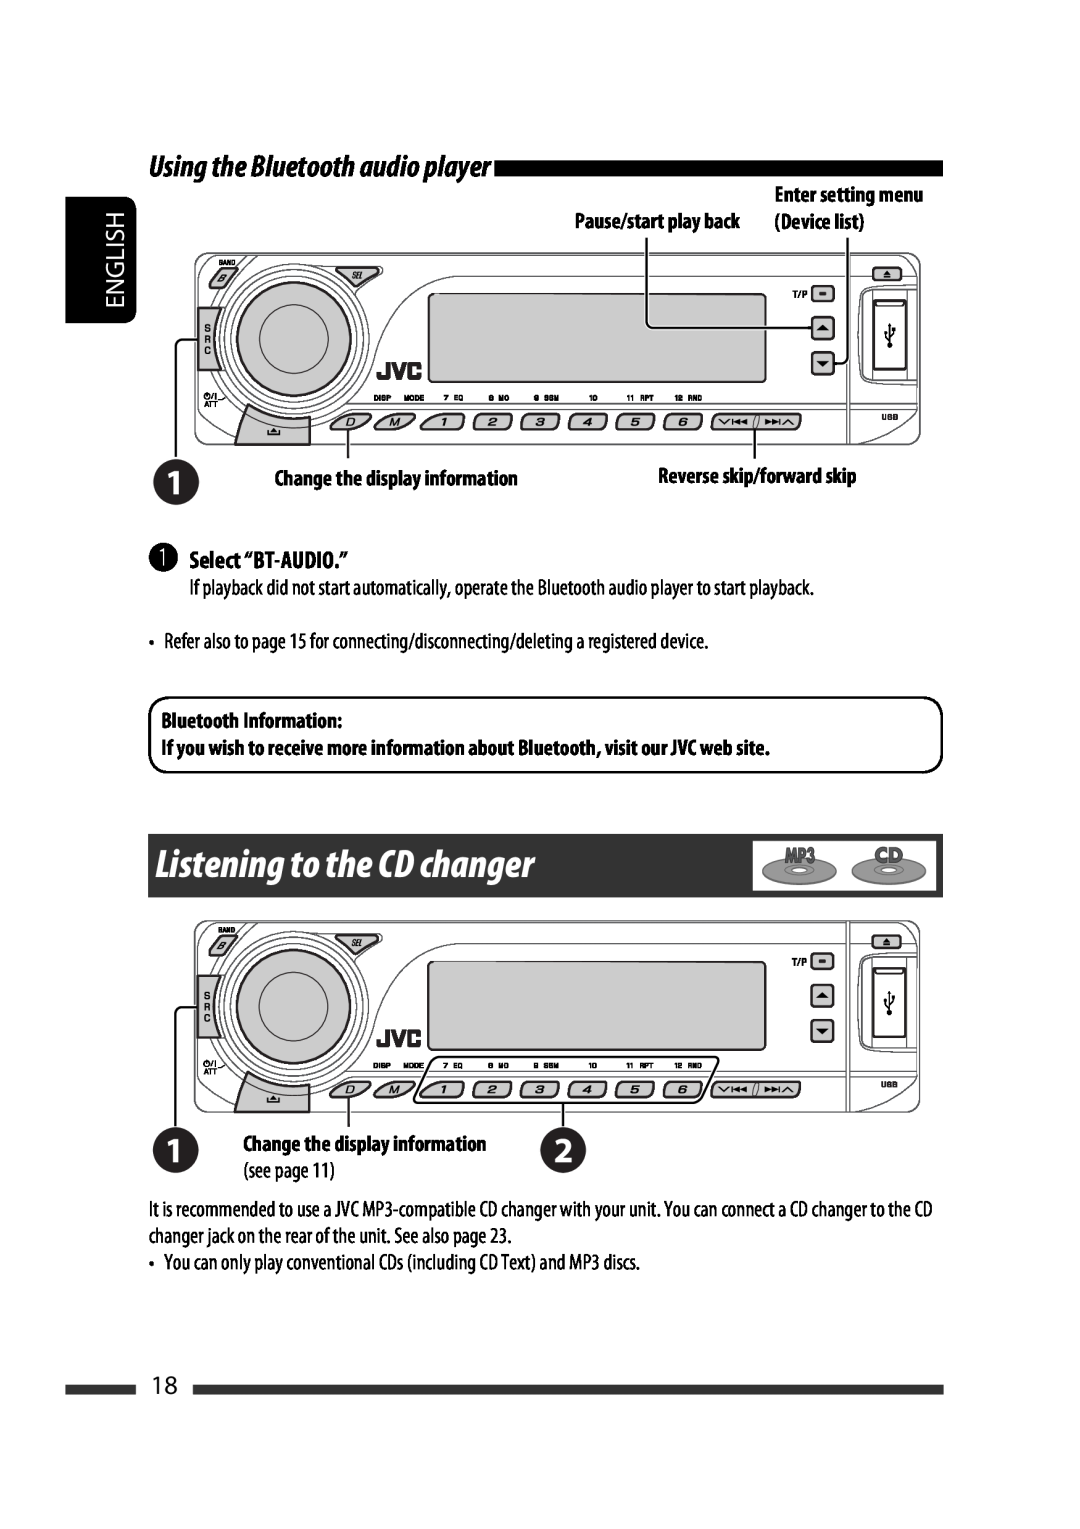 JVC KD-G731 manual Listening to the CD changer, Using the Bluetooth audio player, ~Select “BT-AUDIO.”, Device list, English 